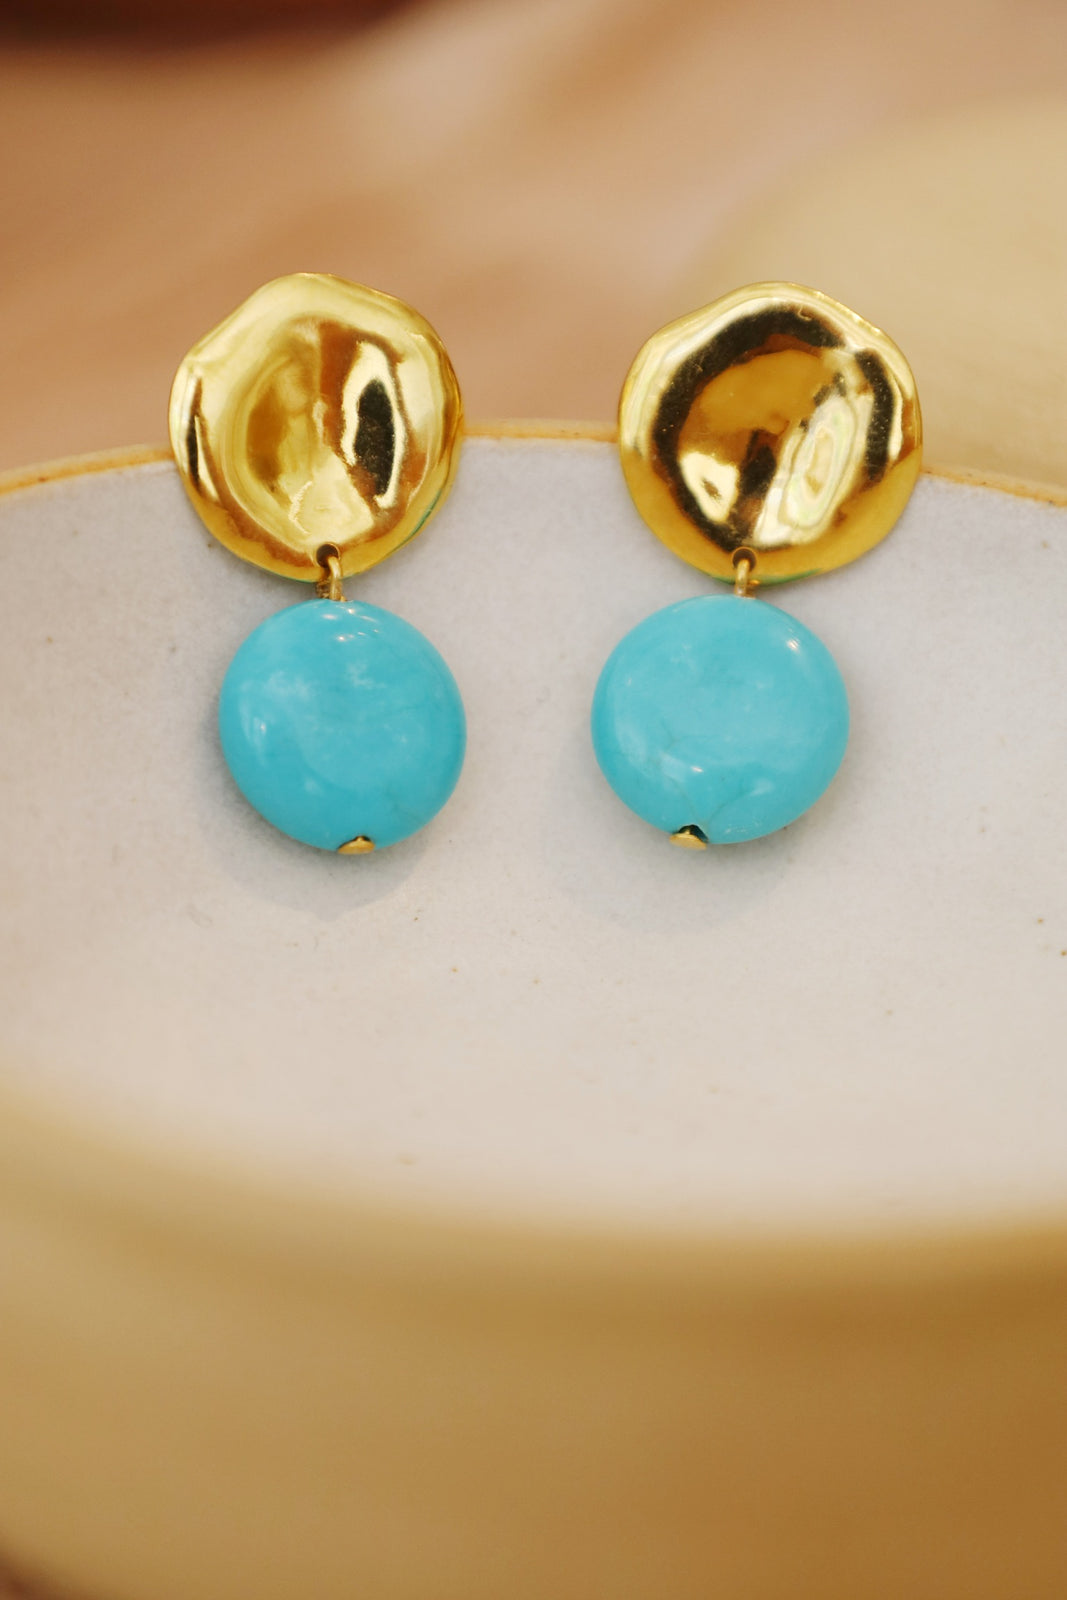 Tiered Turquoise Coin Earrings